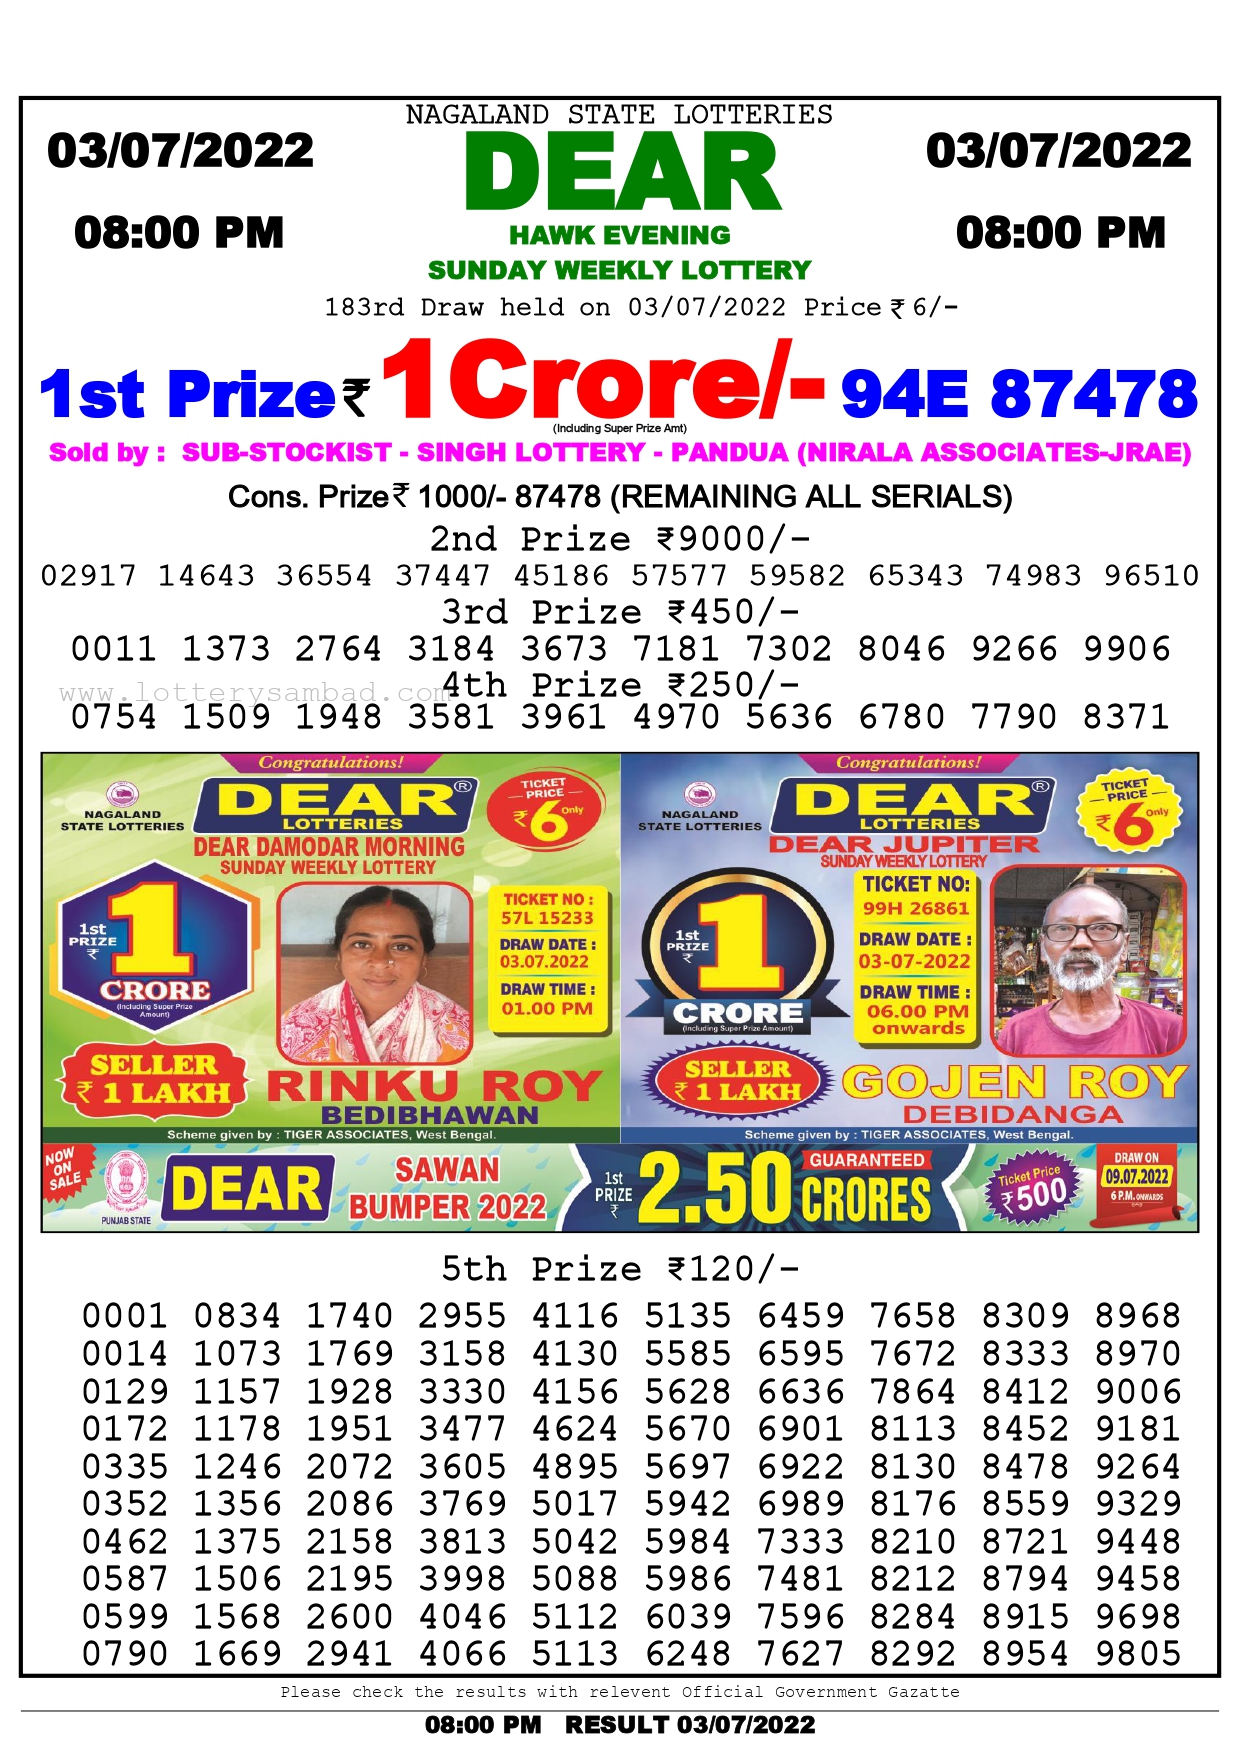 Download Result of Nagaland State Dear 6 Draw 03-07-2022 Draw at 8:00Pm